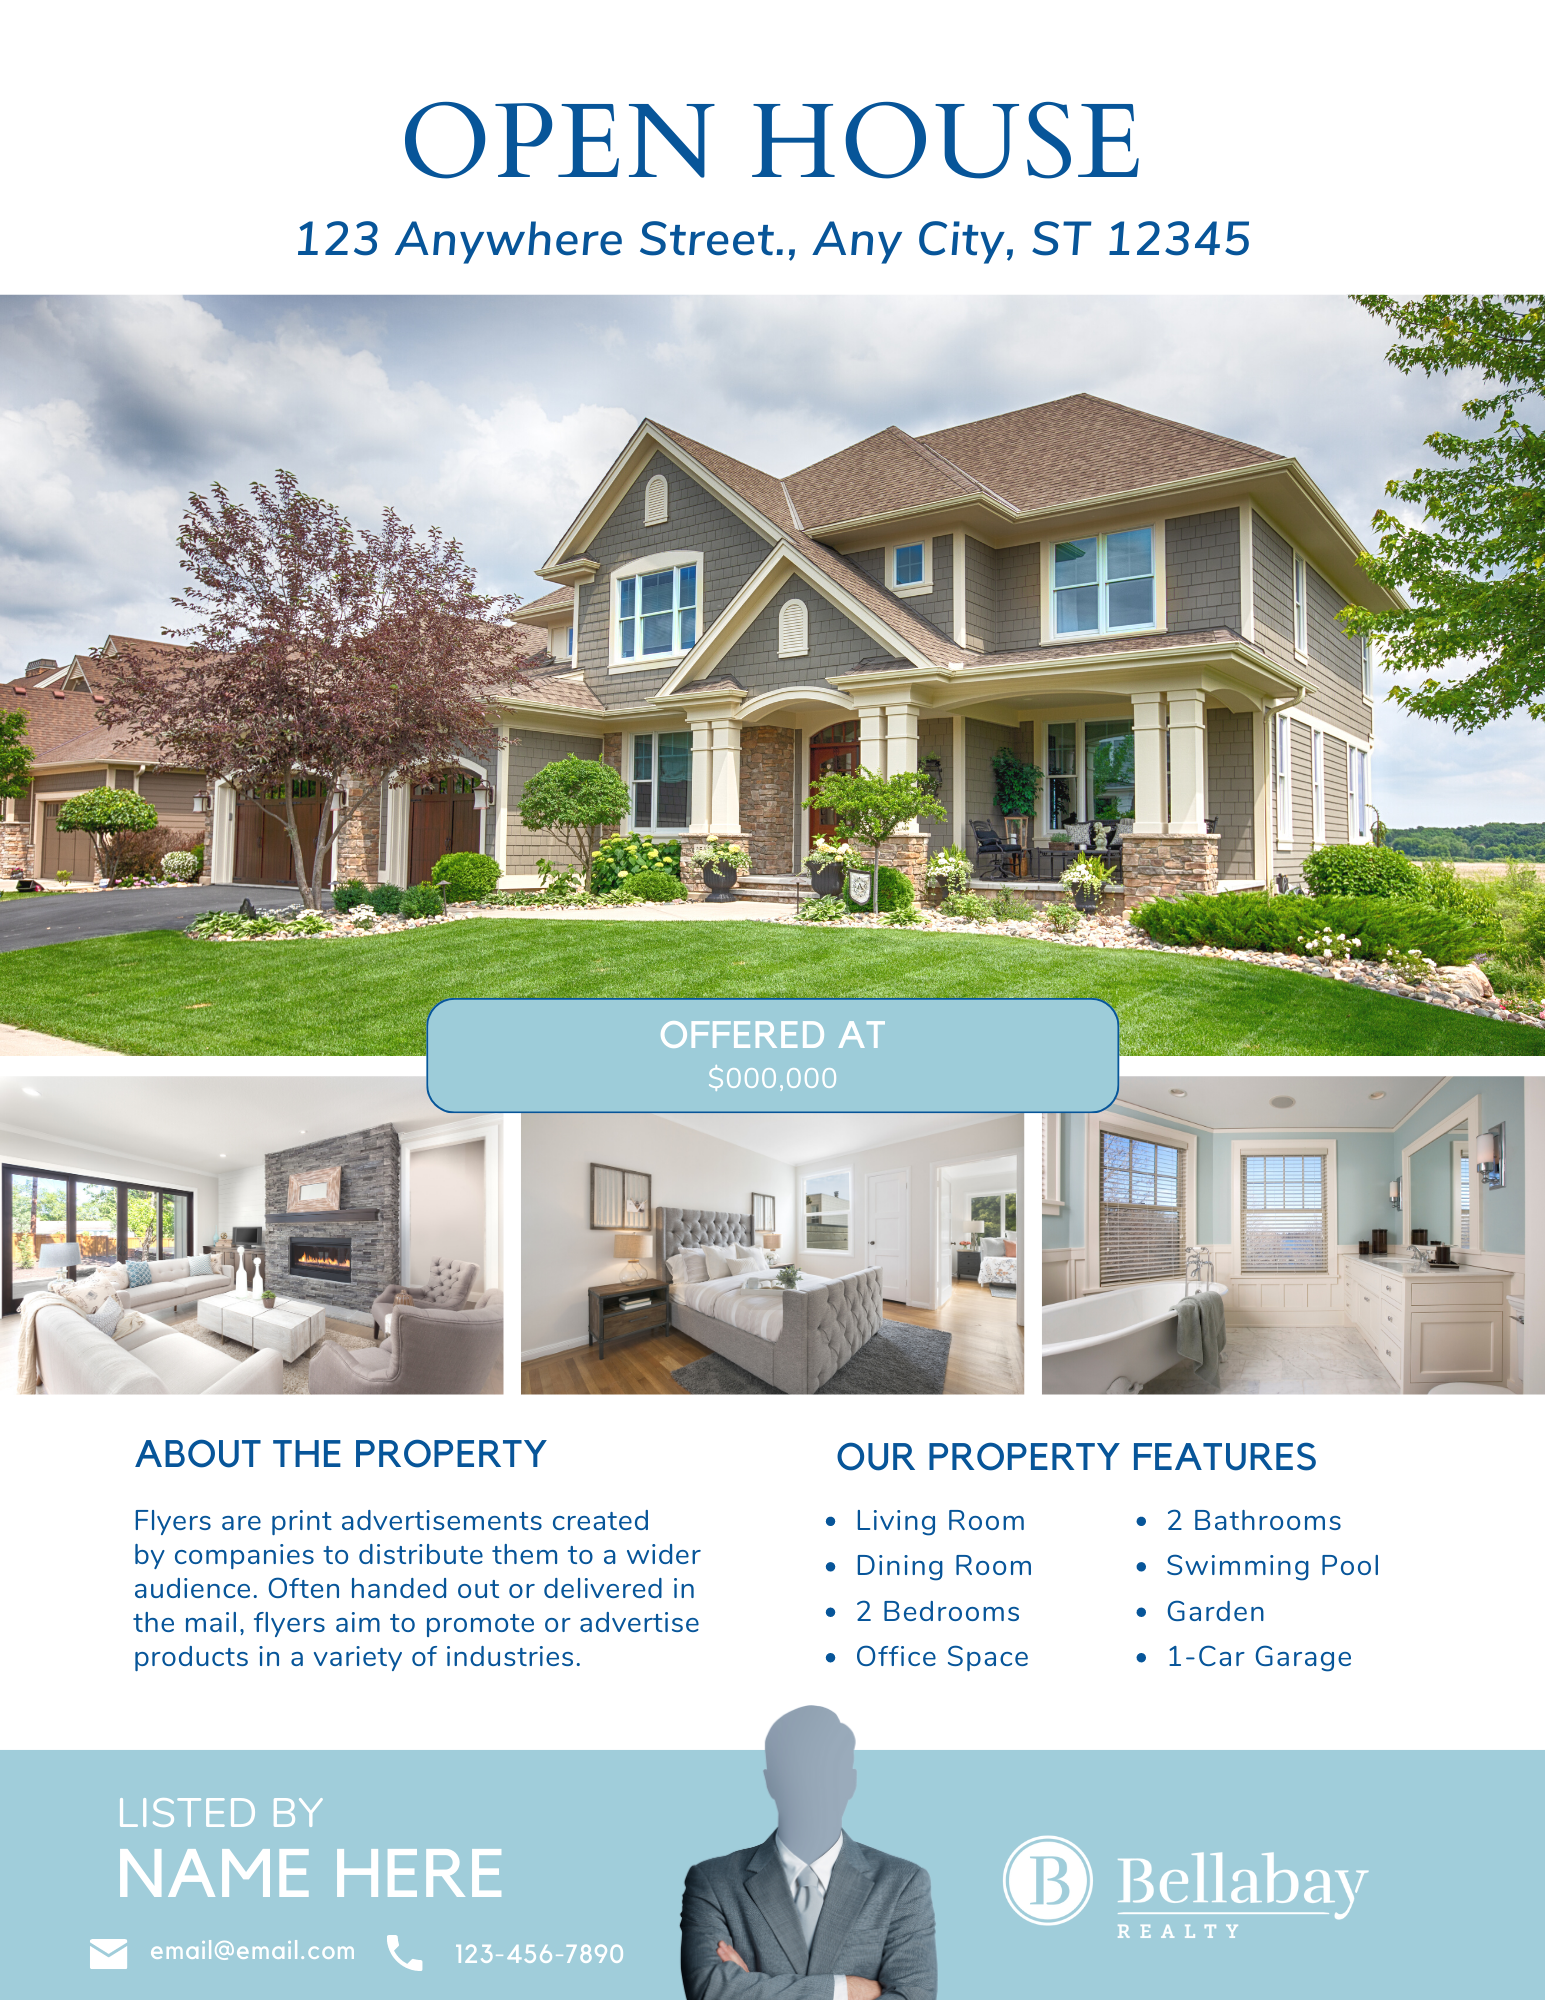 Open House Flyer with Photos of Home and Listing Details